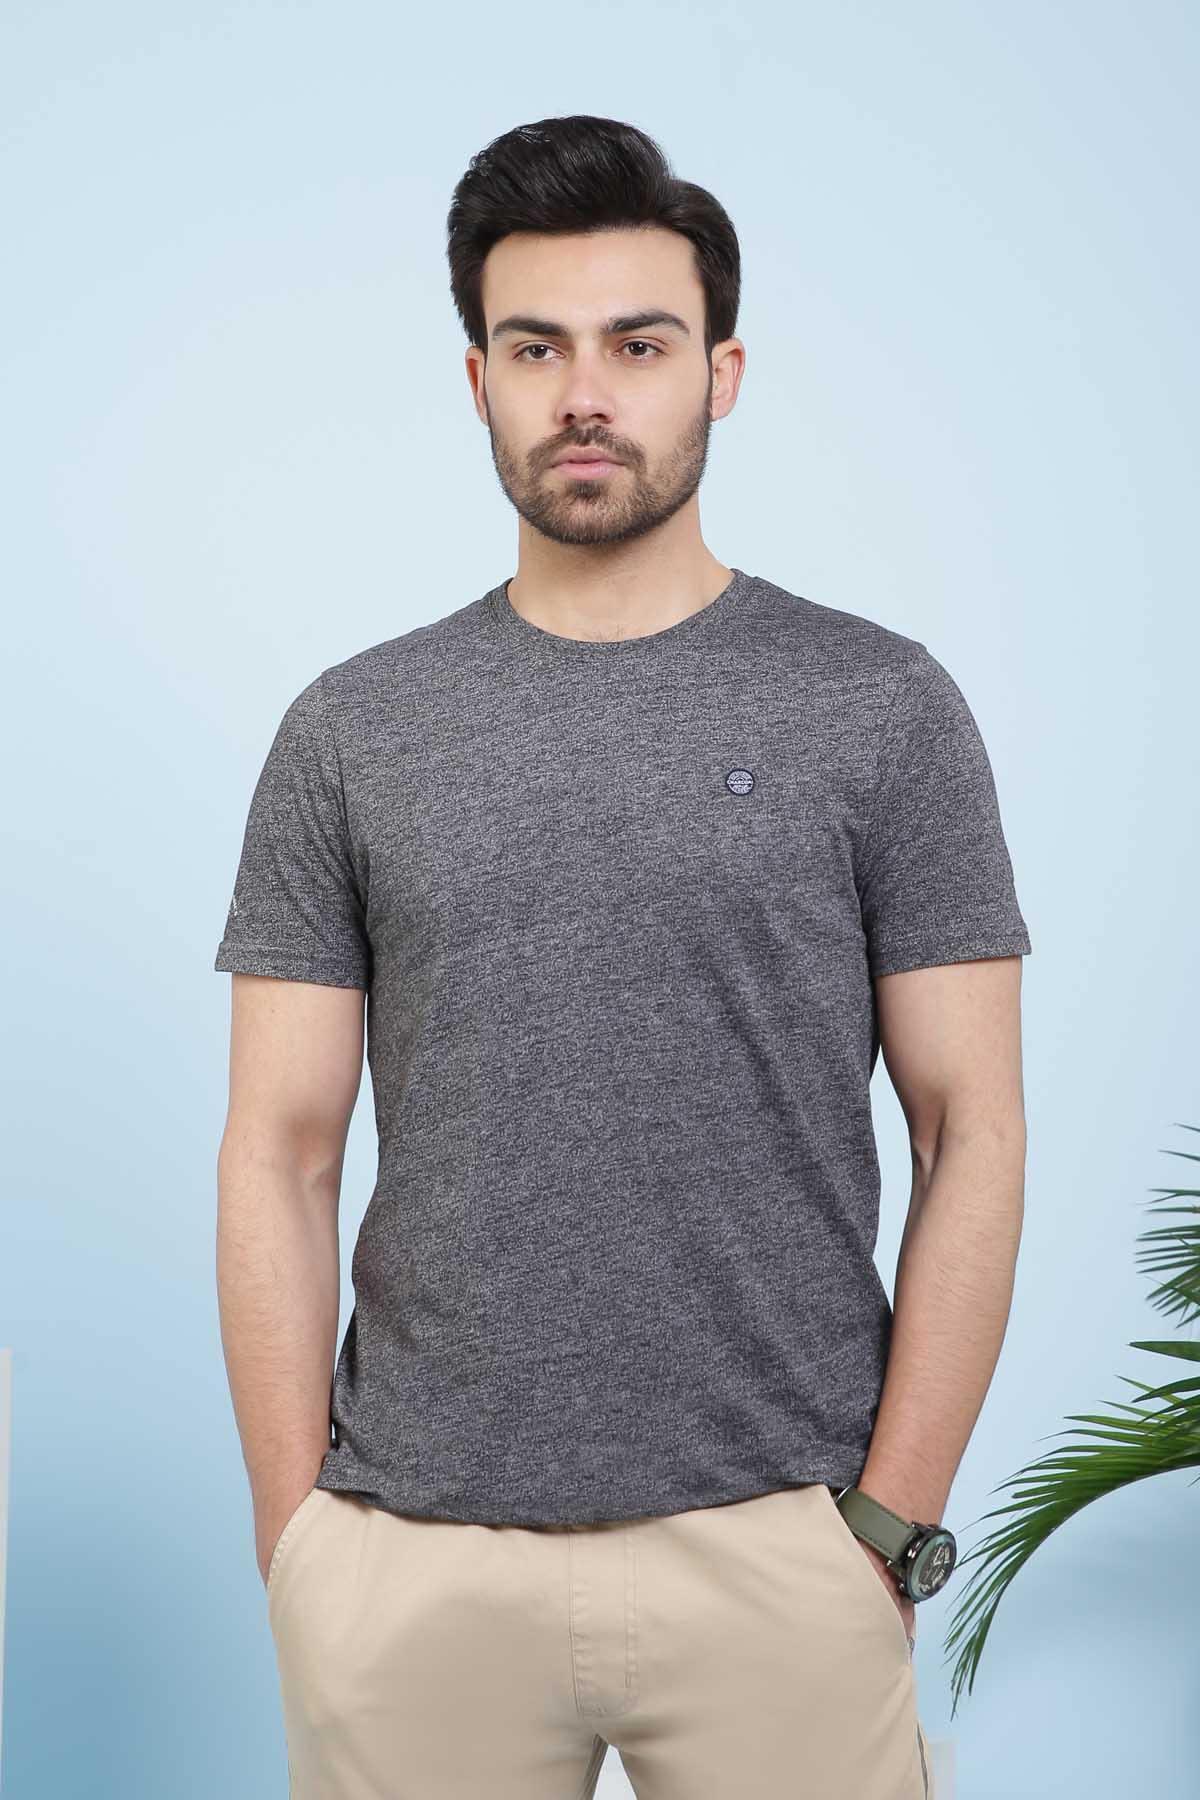 T SHIRT CREW NECK CHARCOAL at Charcoal Clothing